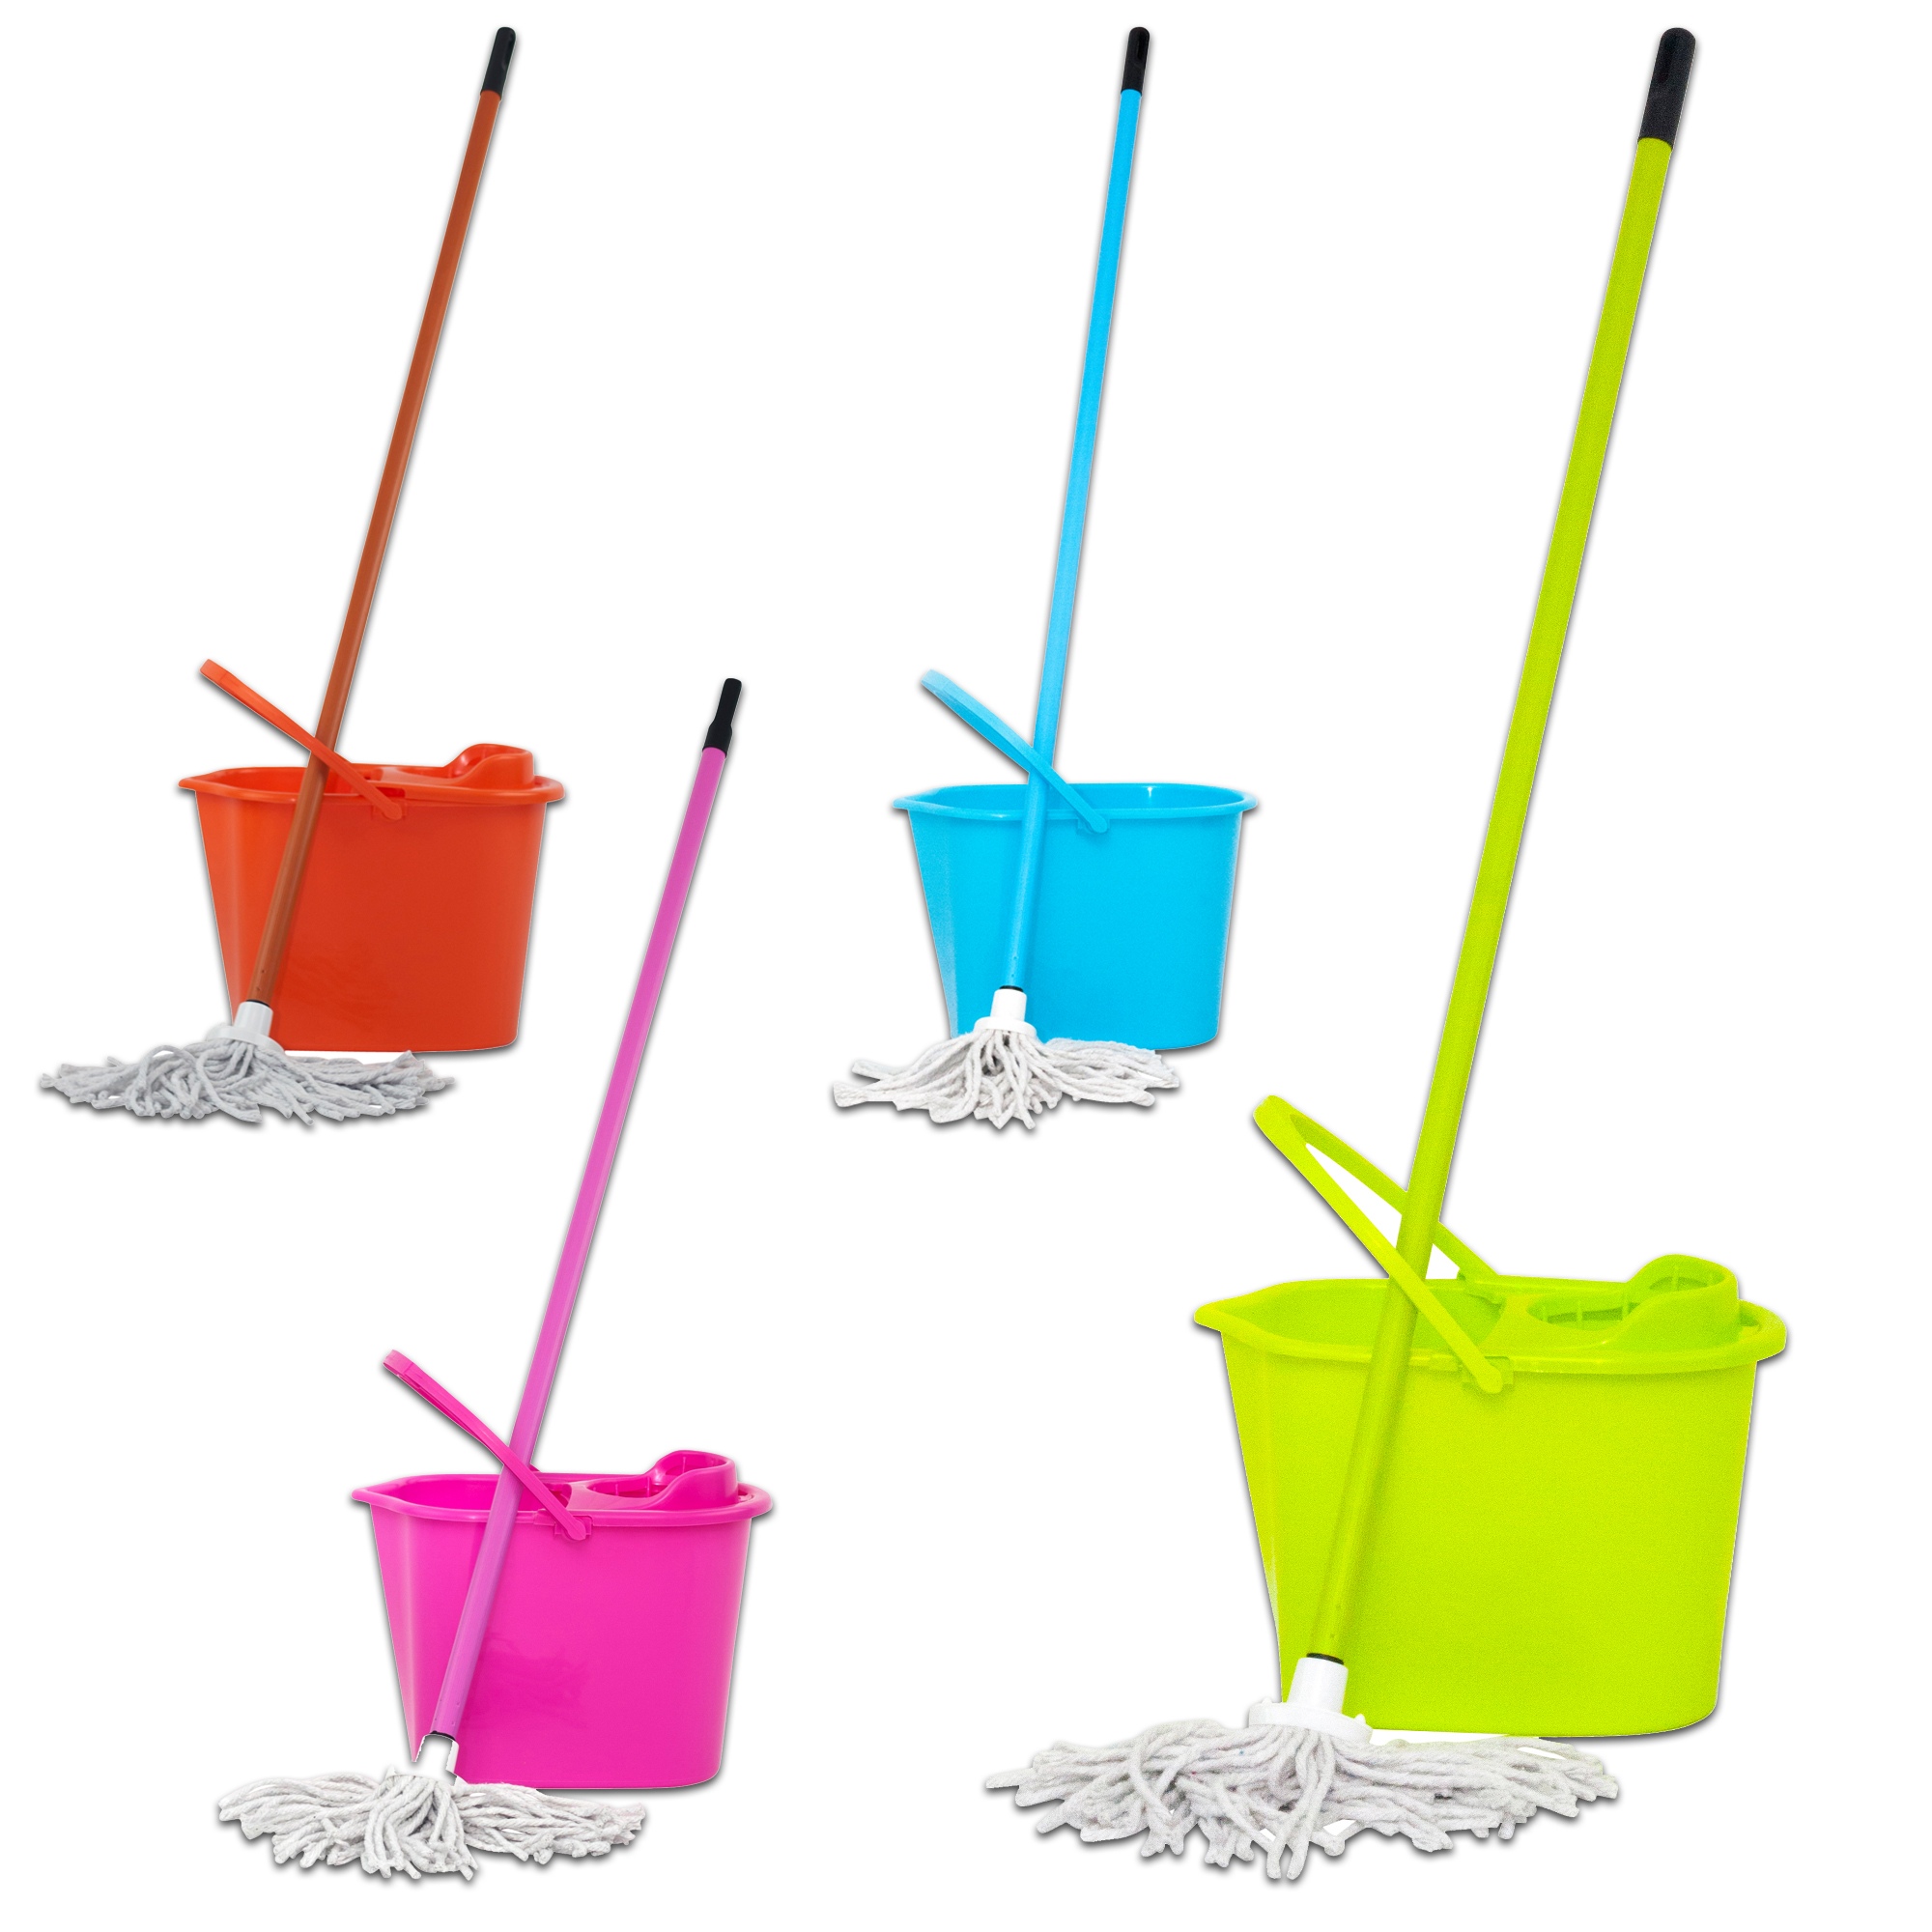 Mop And Bucket Home Cleaning Set Household Maintenance Tidy Floor Wash 